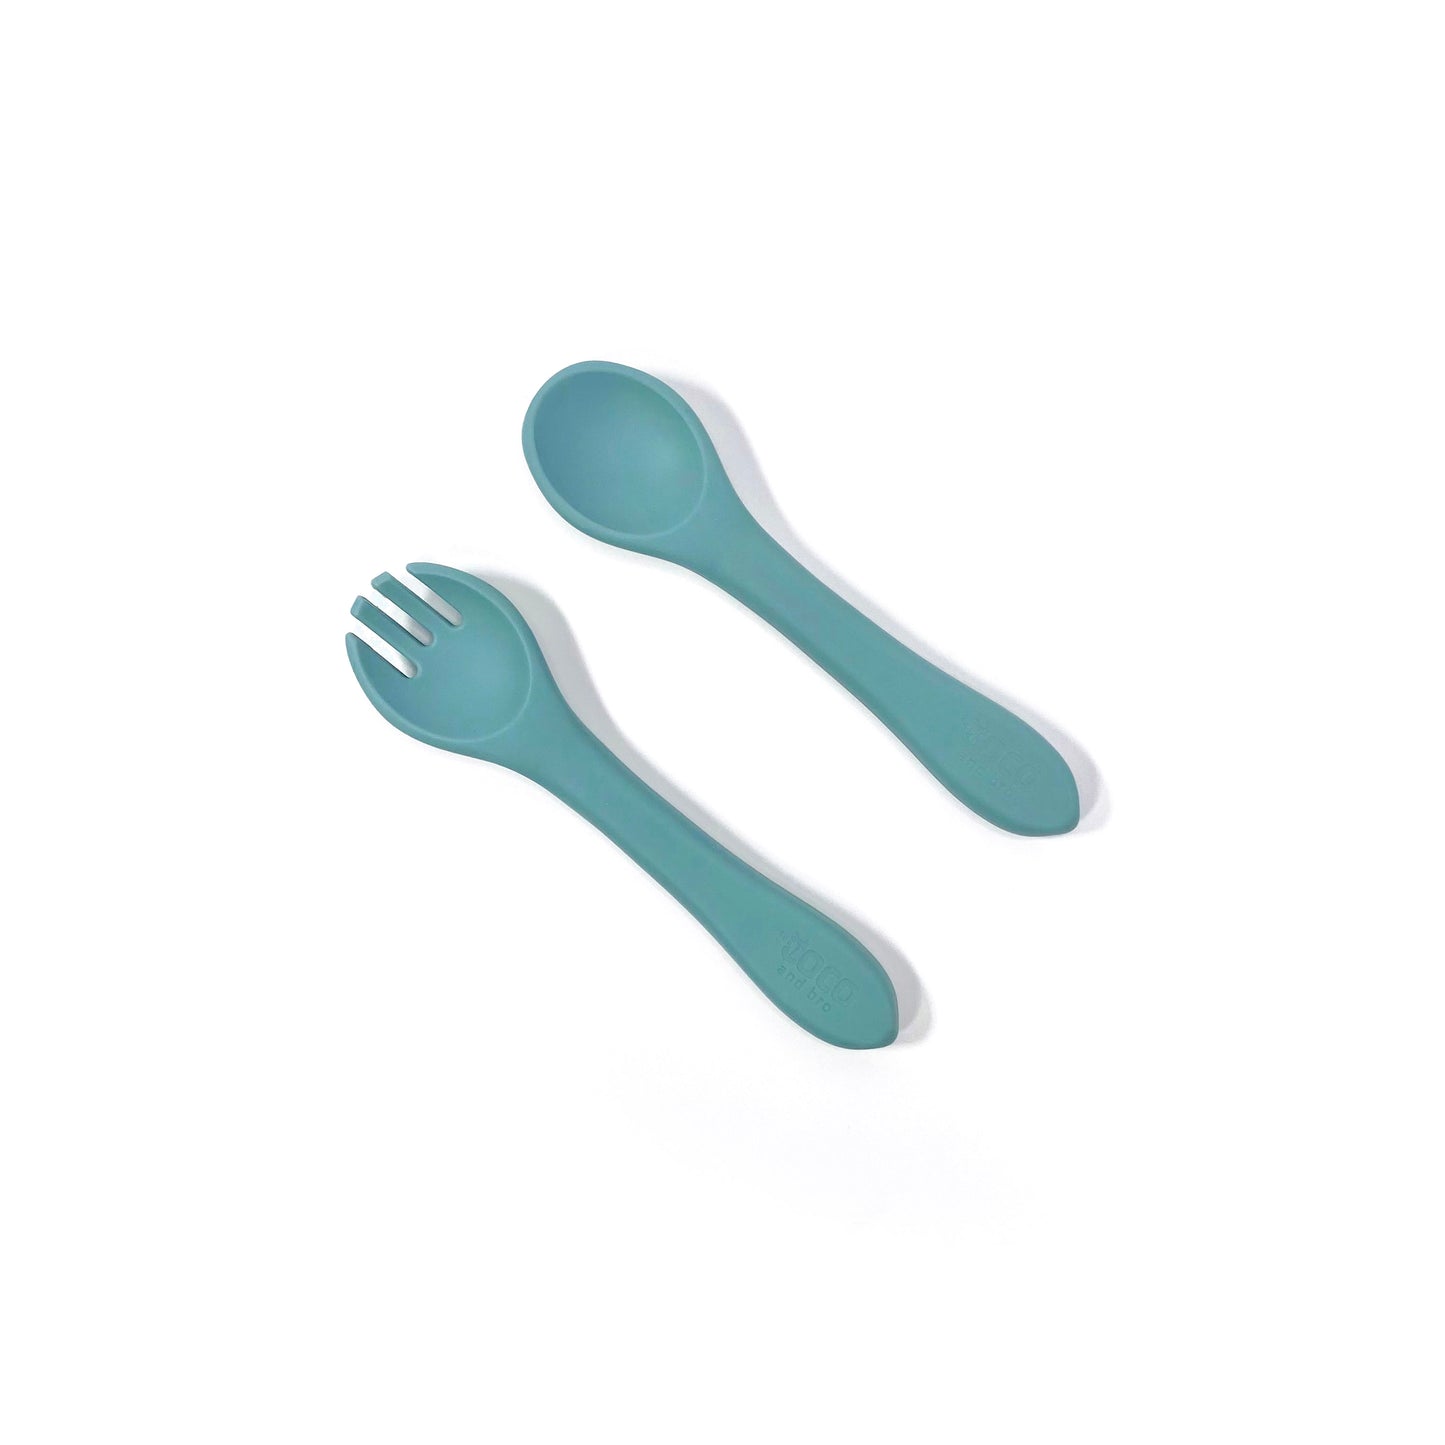 A set of sky blue silicone children’s cutlery.